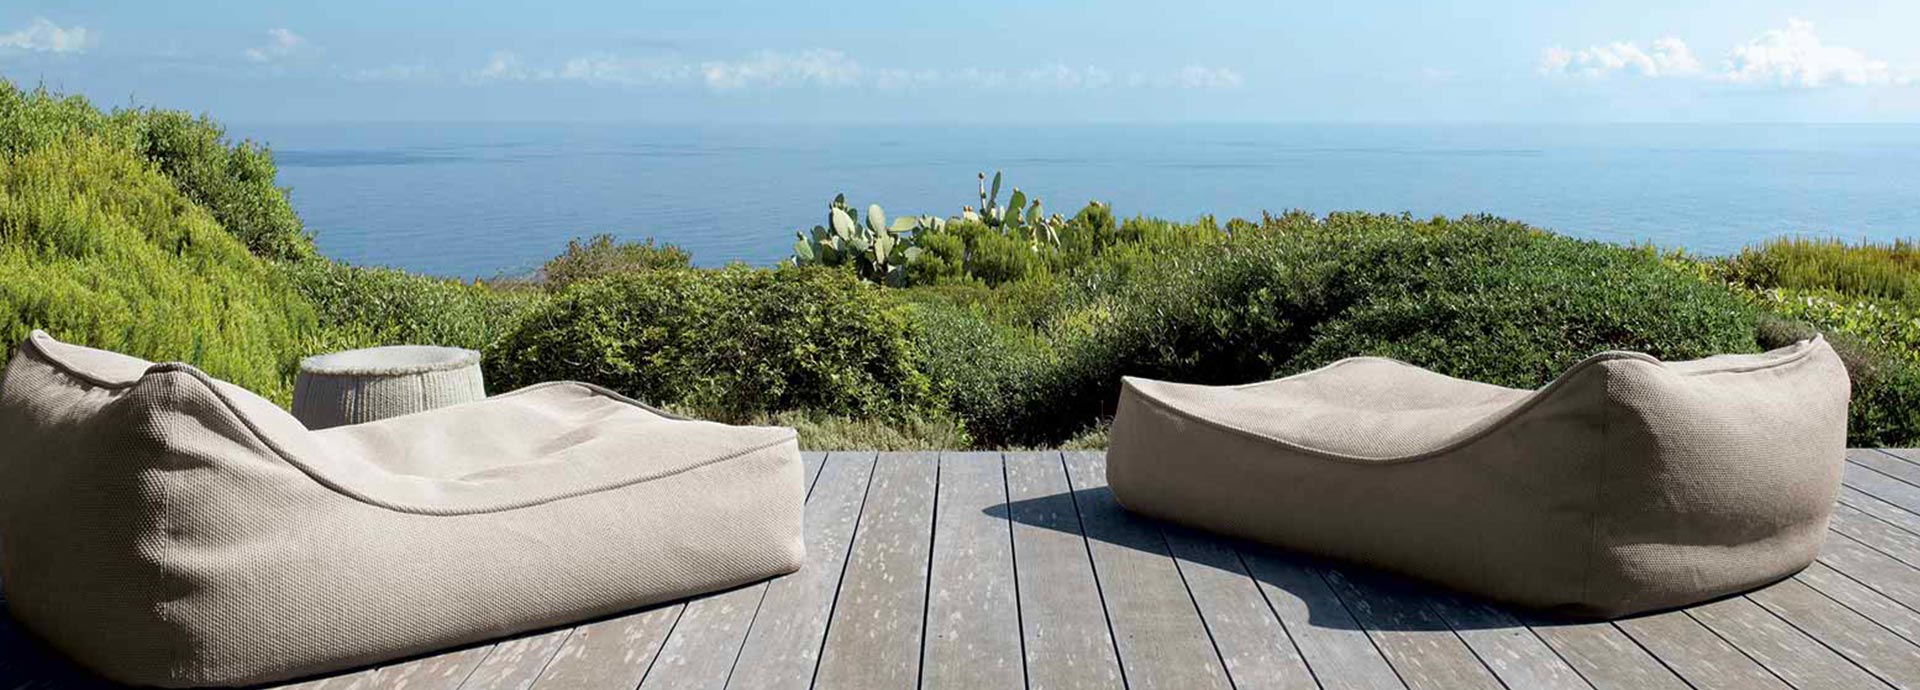 Float Paola Lenti collection